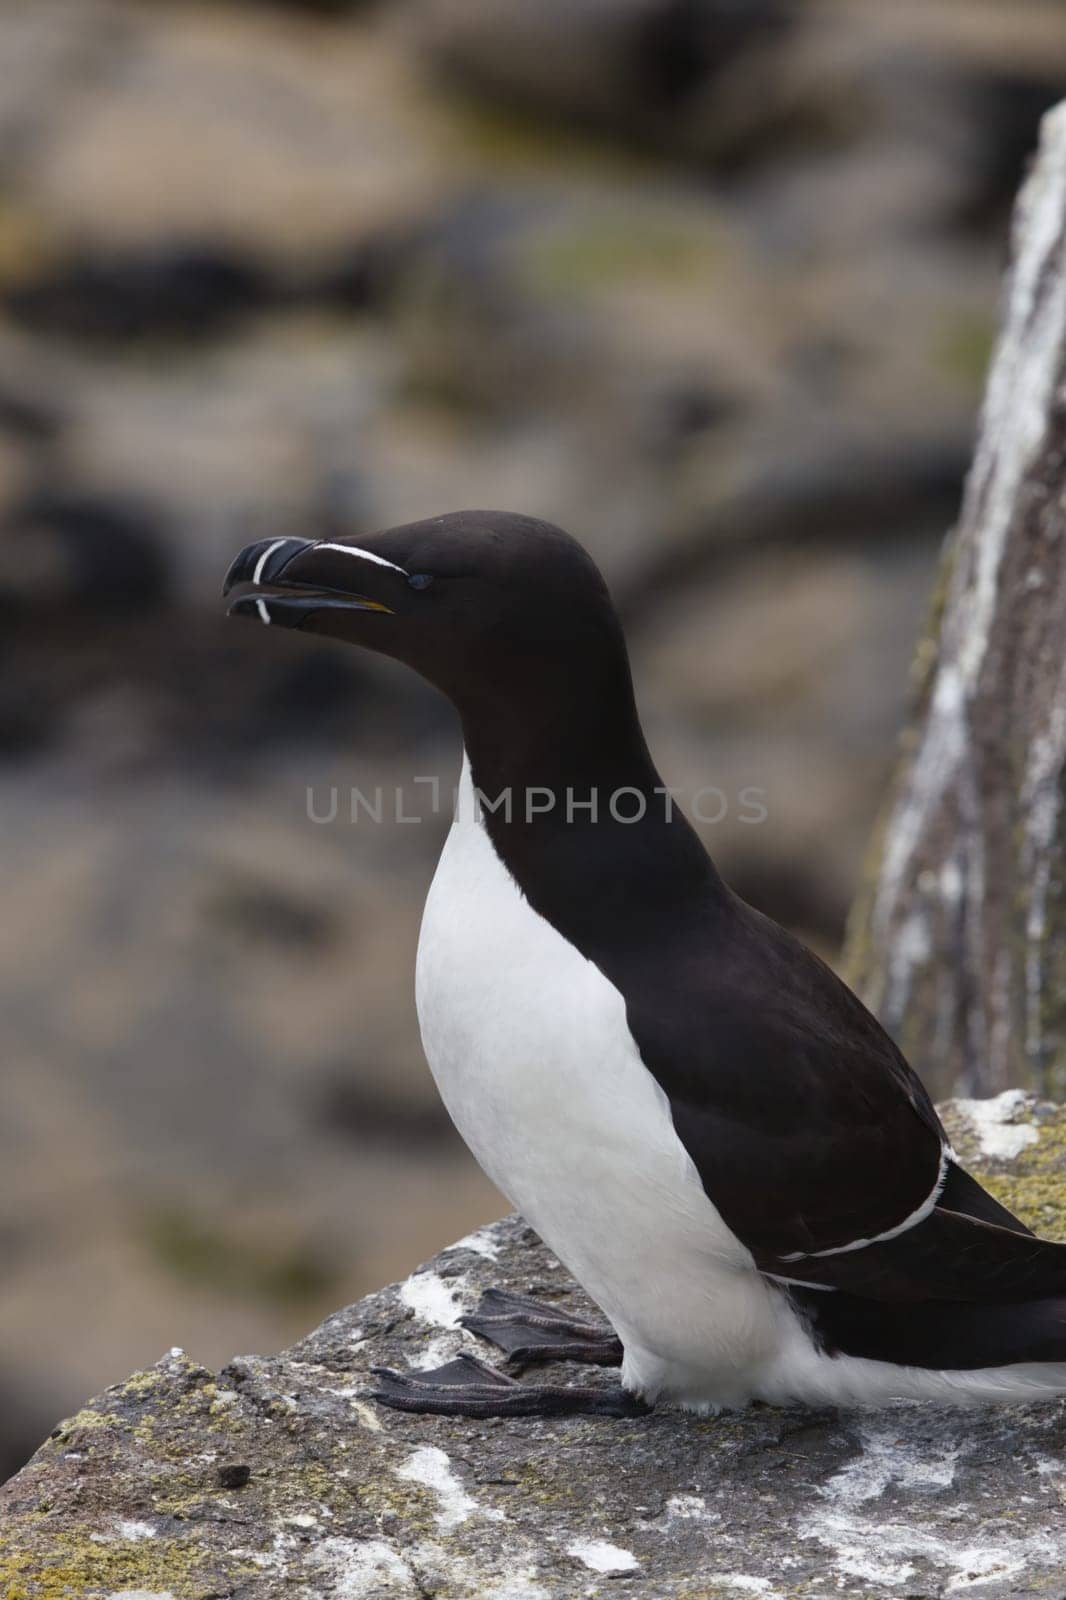 Experience the arresting beauty of one of the ocean's elusive birds with this close-up photograph of a Razorbill, captured on the iconic Isle of May. The image offers an unparalleled look at the bird's intricate feather patterns, striking beak, and intense gaze, allowing the viewer to appreciate the subtleties that make this species so captivating. The close-up perspective provides an intimacy that is often missing in wildlife photography, making you feel as if you're sharing a quiet moment with this remarkable bird.